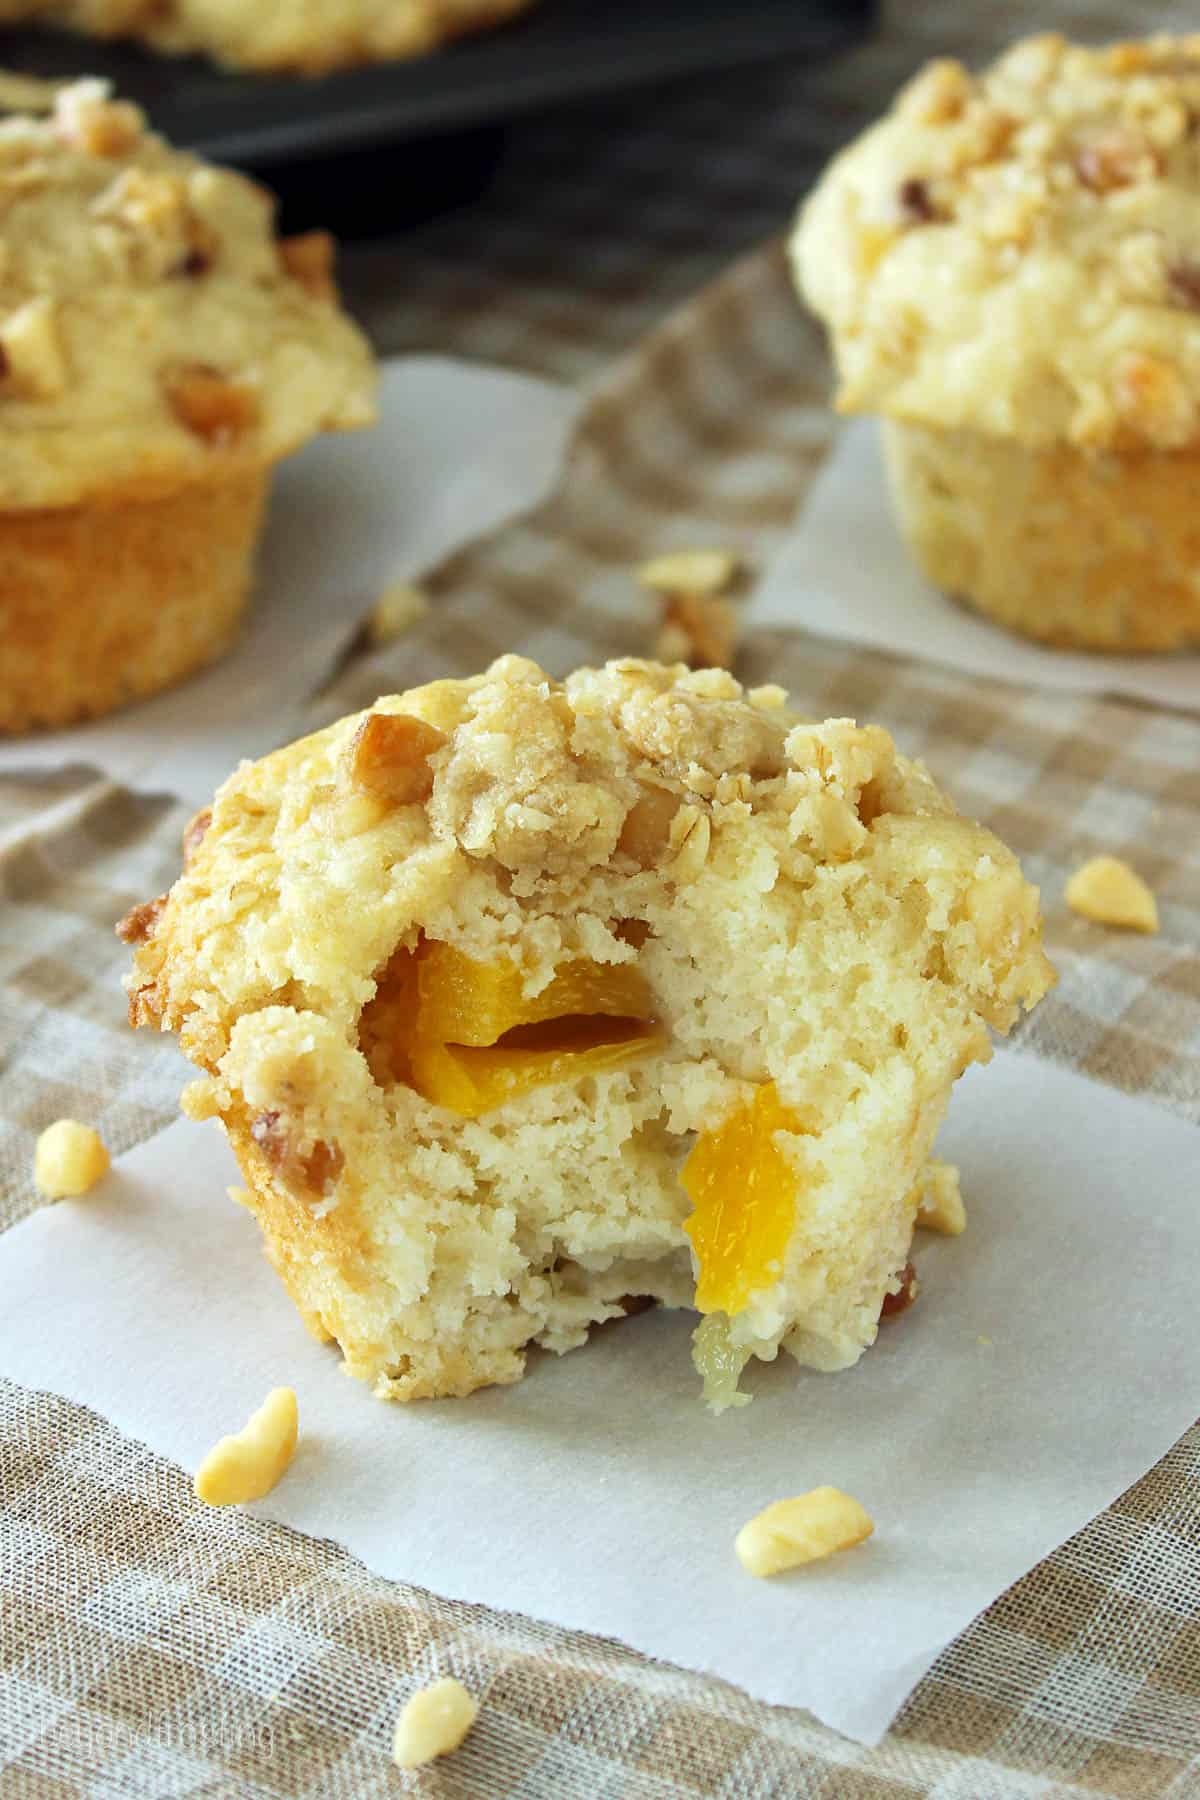 a peach macadamia nut muffin with a bite taken out